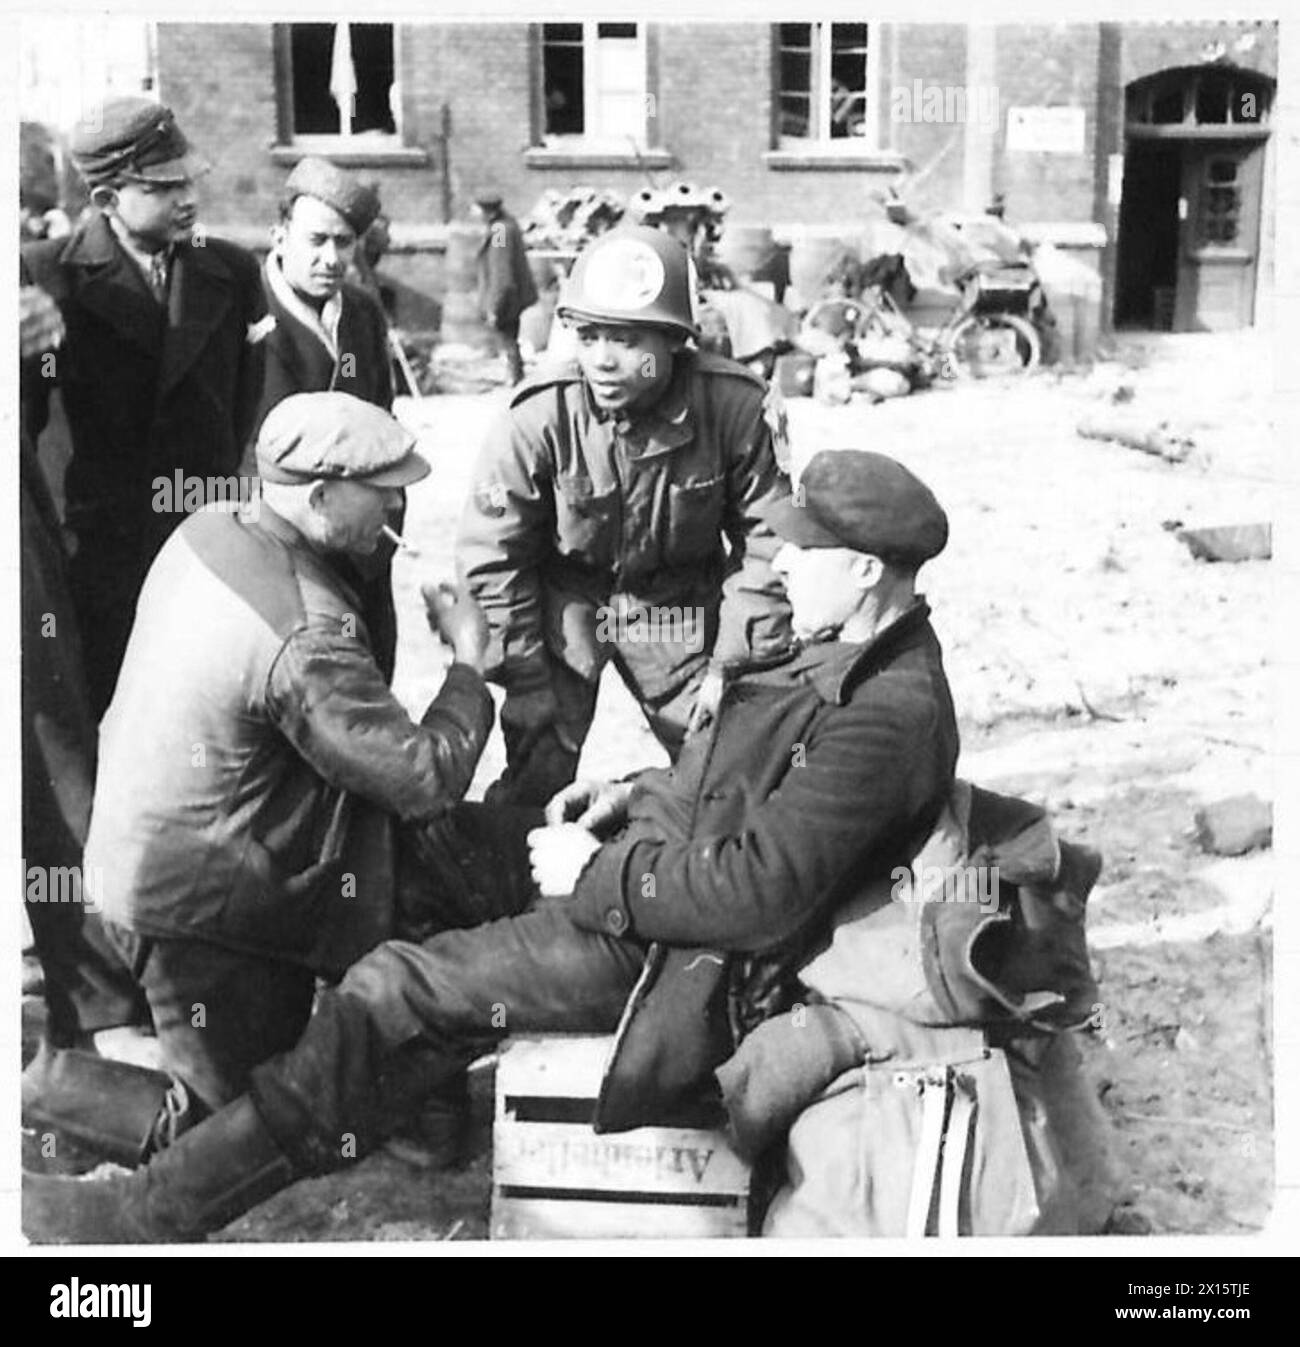 THE DISPLACED PERSONS AND REFUGEES IN GERMANY - Corporal Frank Gaskins of the US Medical Corps (in private life from Washington) in conversation with Russian and Polish forced labourers. Some 300 displaced persons, Poles, Russians, Italians, French and Dutch, who were doing forced labour in Germany, are being fed by the 516th Department of the Military Government in the ruined town of Wesel American Army Stock Photo